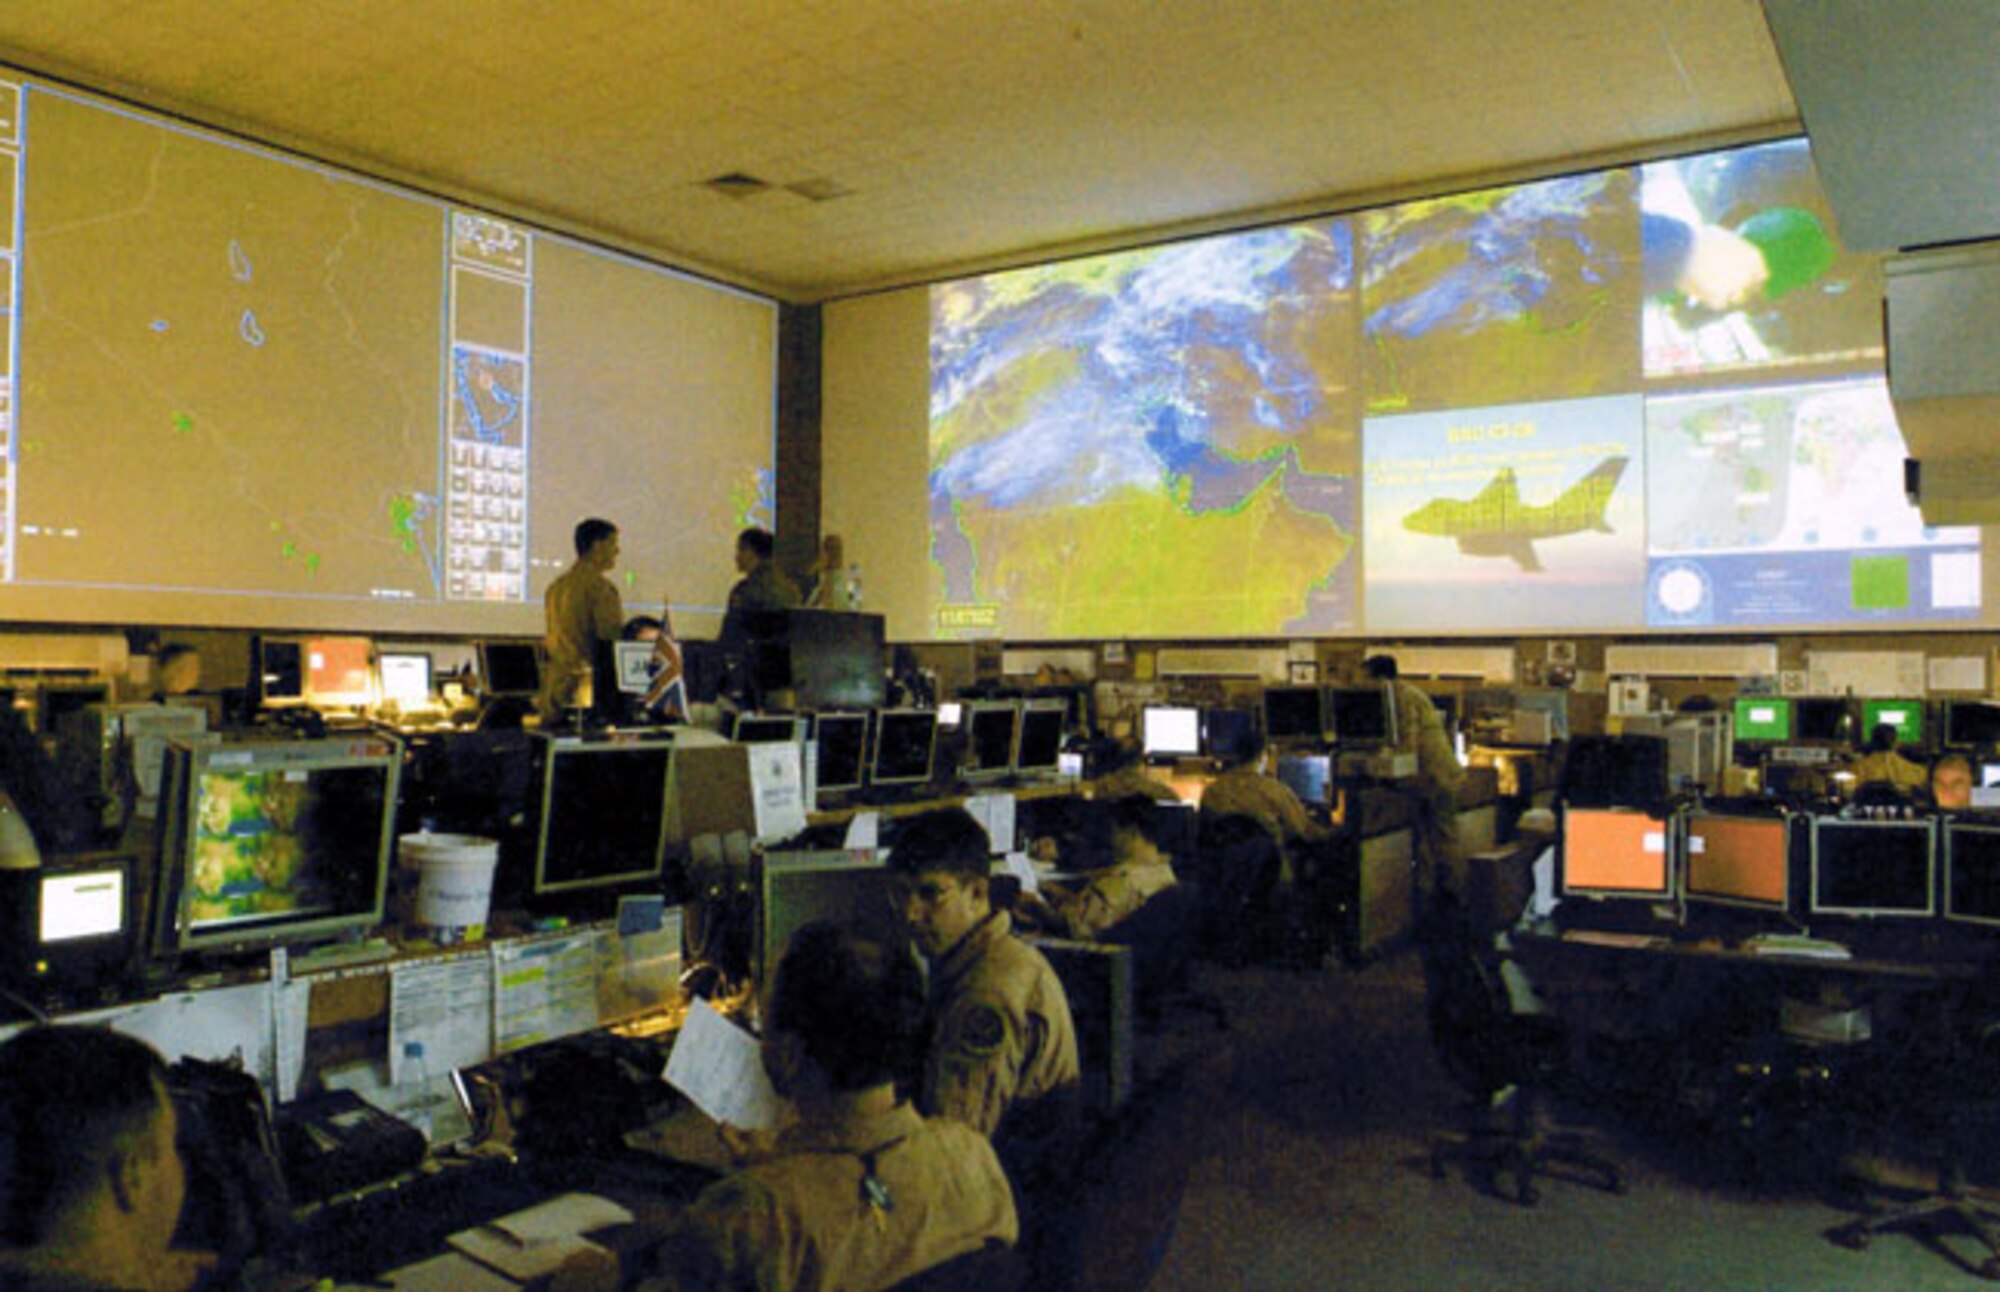 Theater Battle Operations Network-Centric Environment (TBONE)